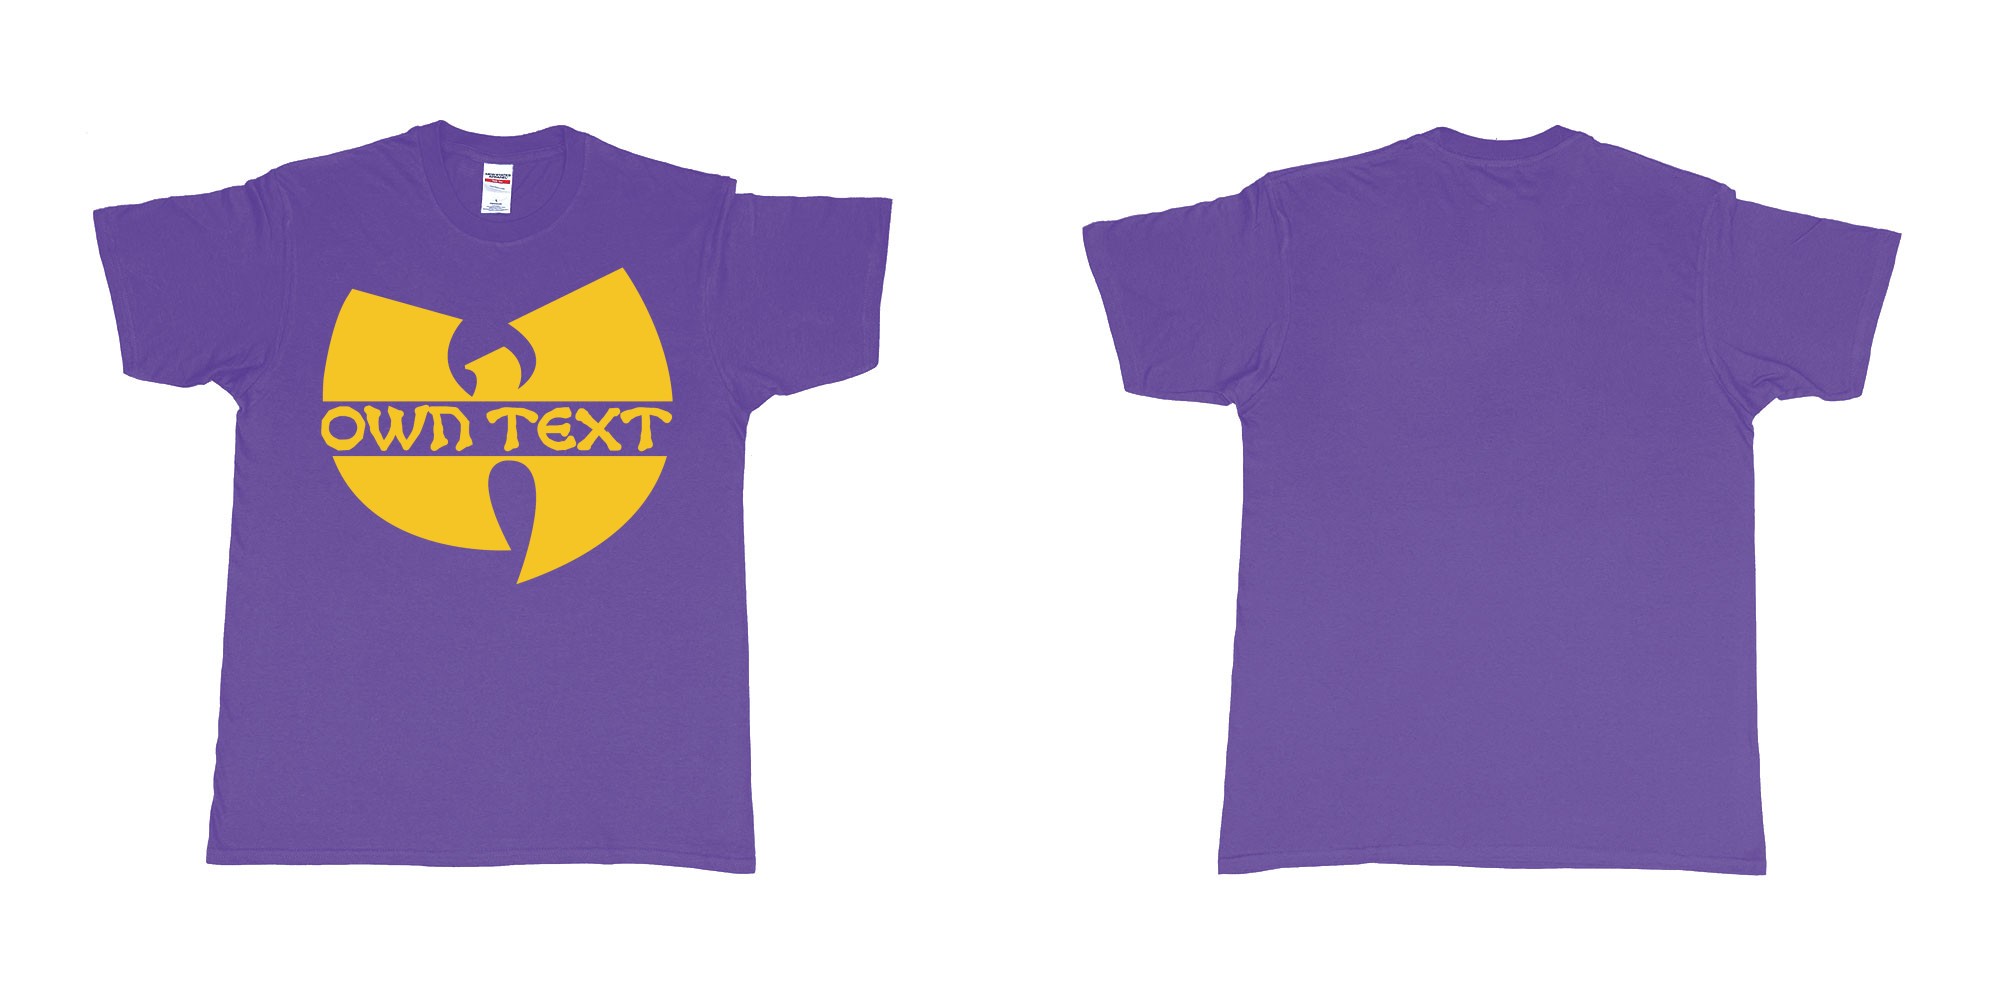 Custom tshirt design wu tang clan logo in fabric color purple choice your own text made in Bali by The Pirate Way